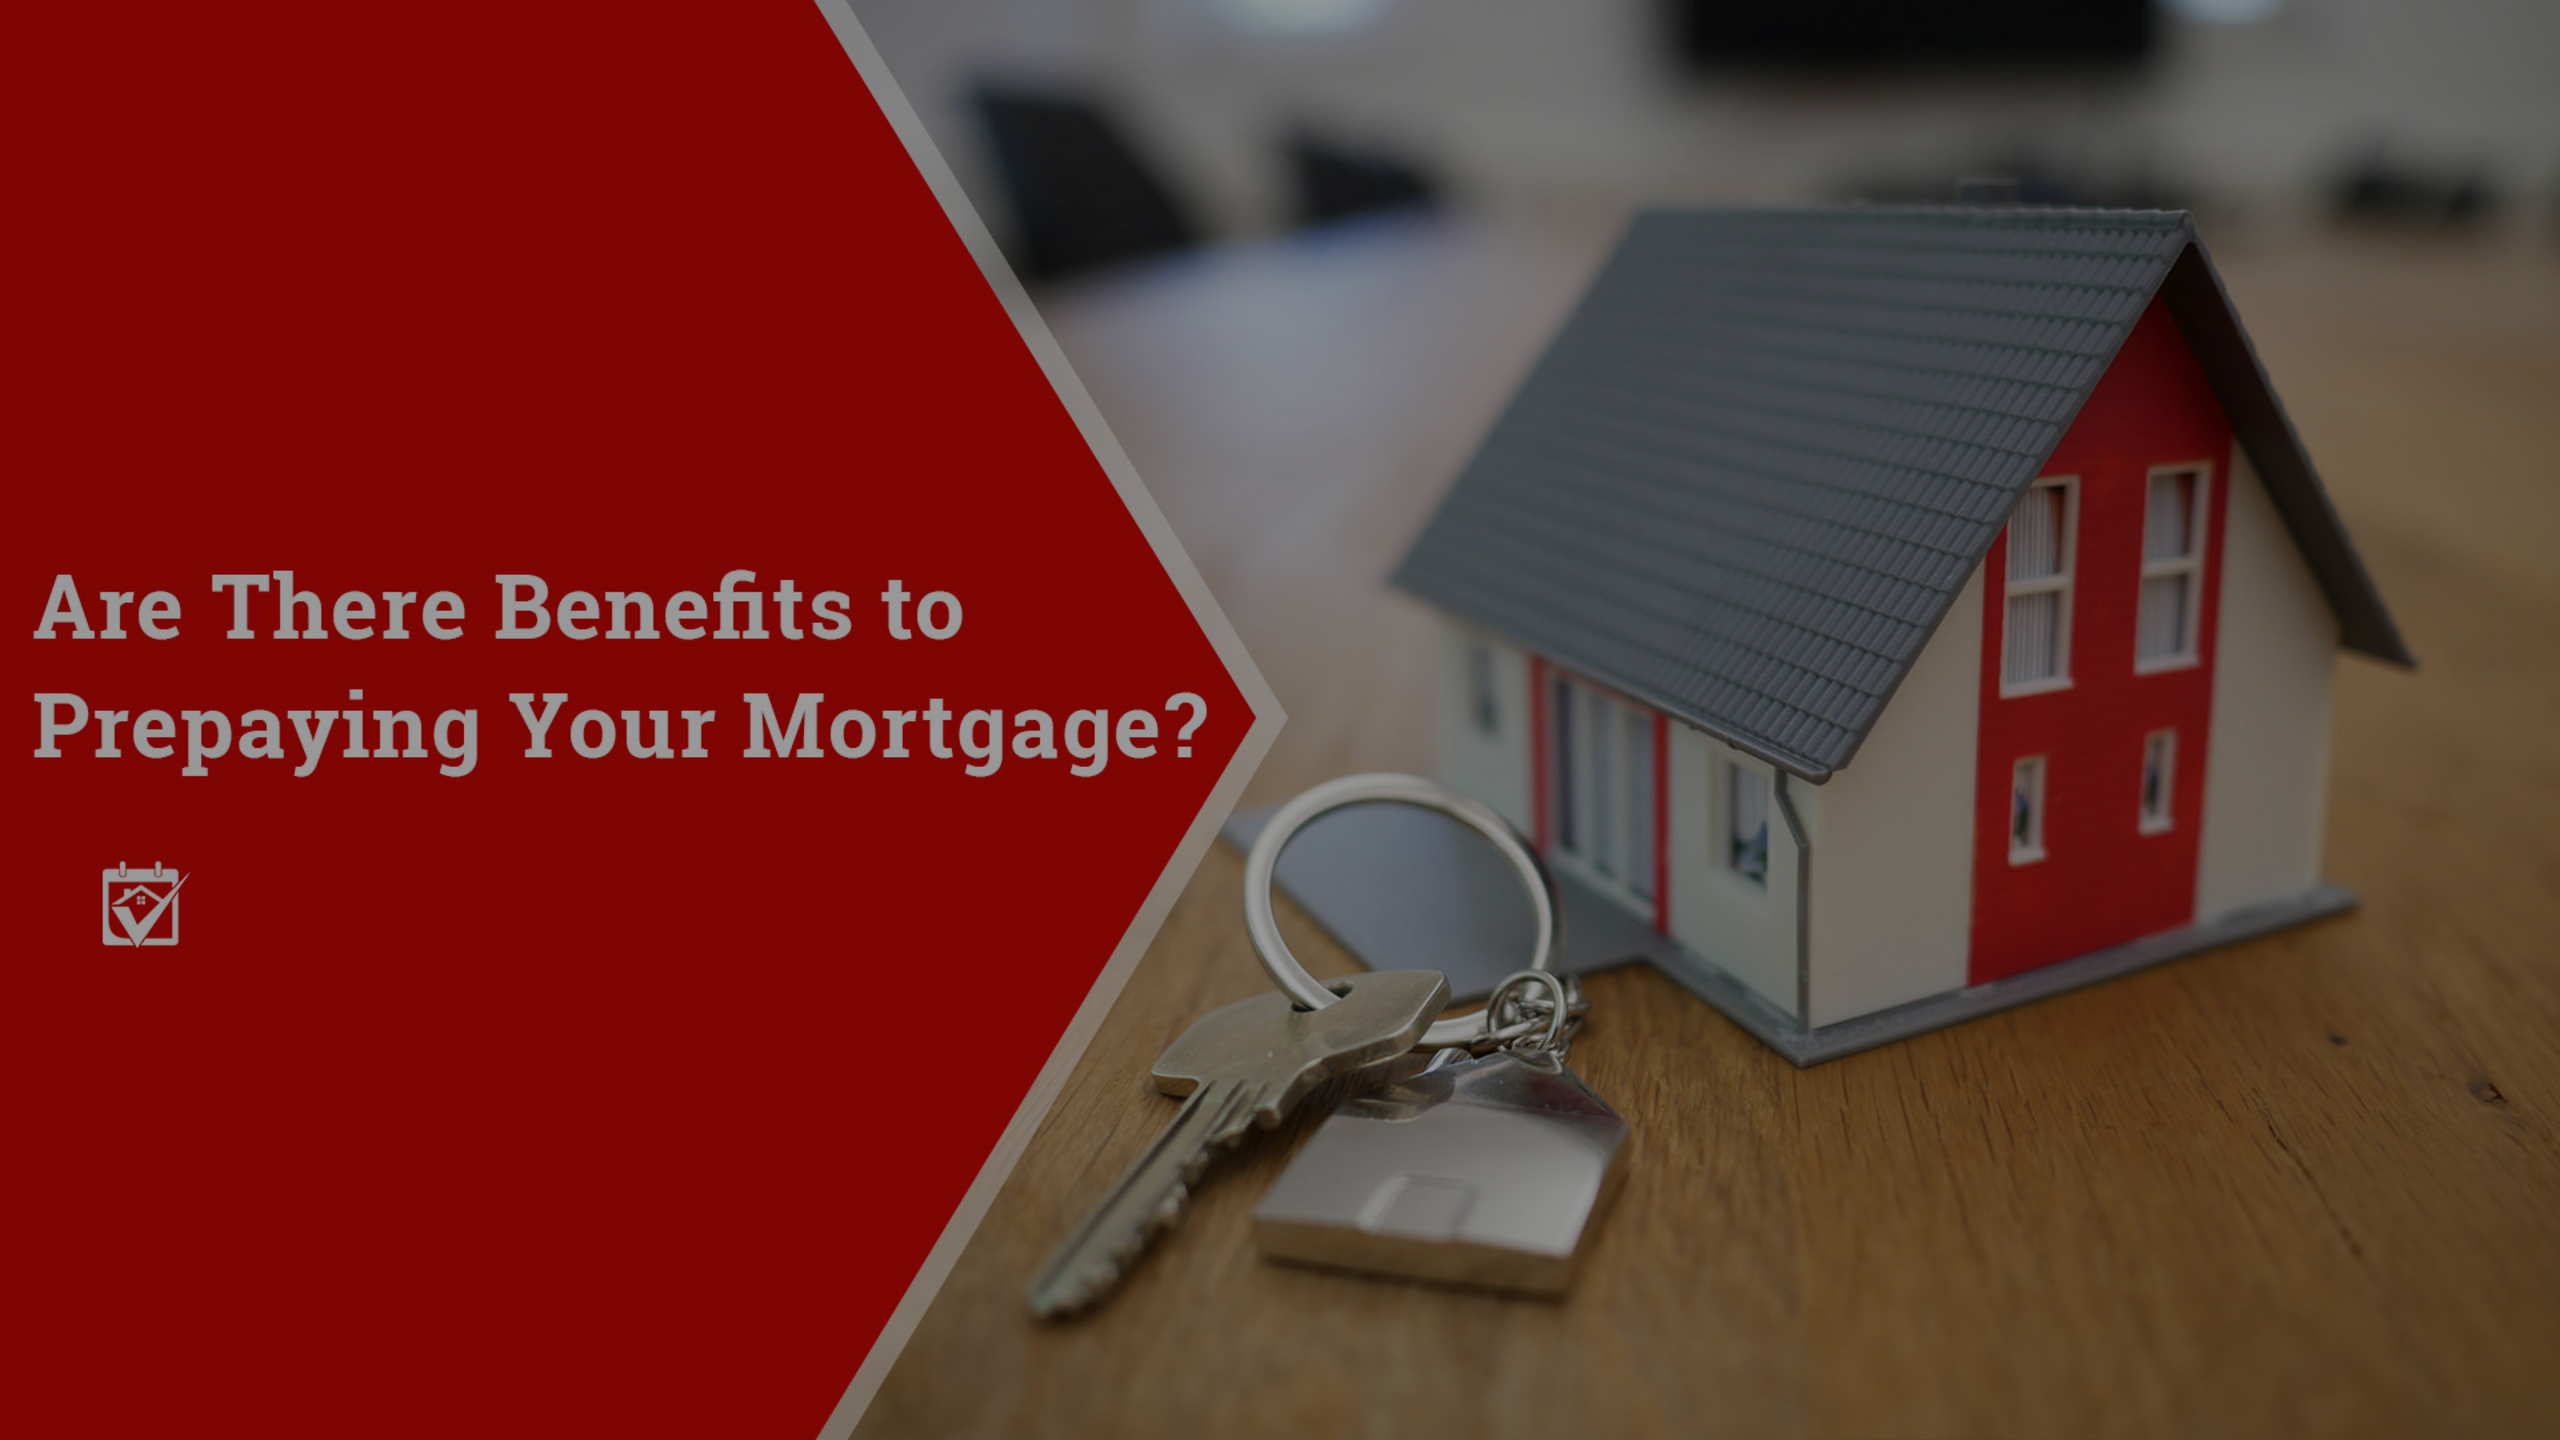 Are There Benefits to Prepaying Your Mortgage?